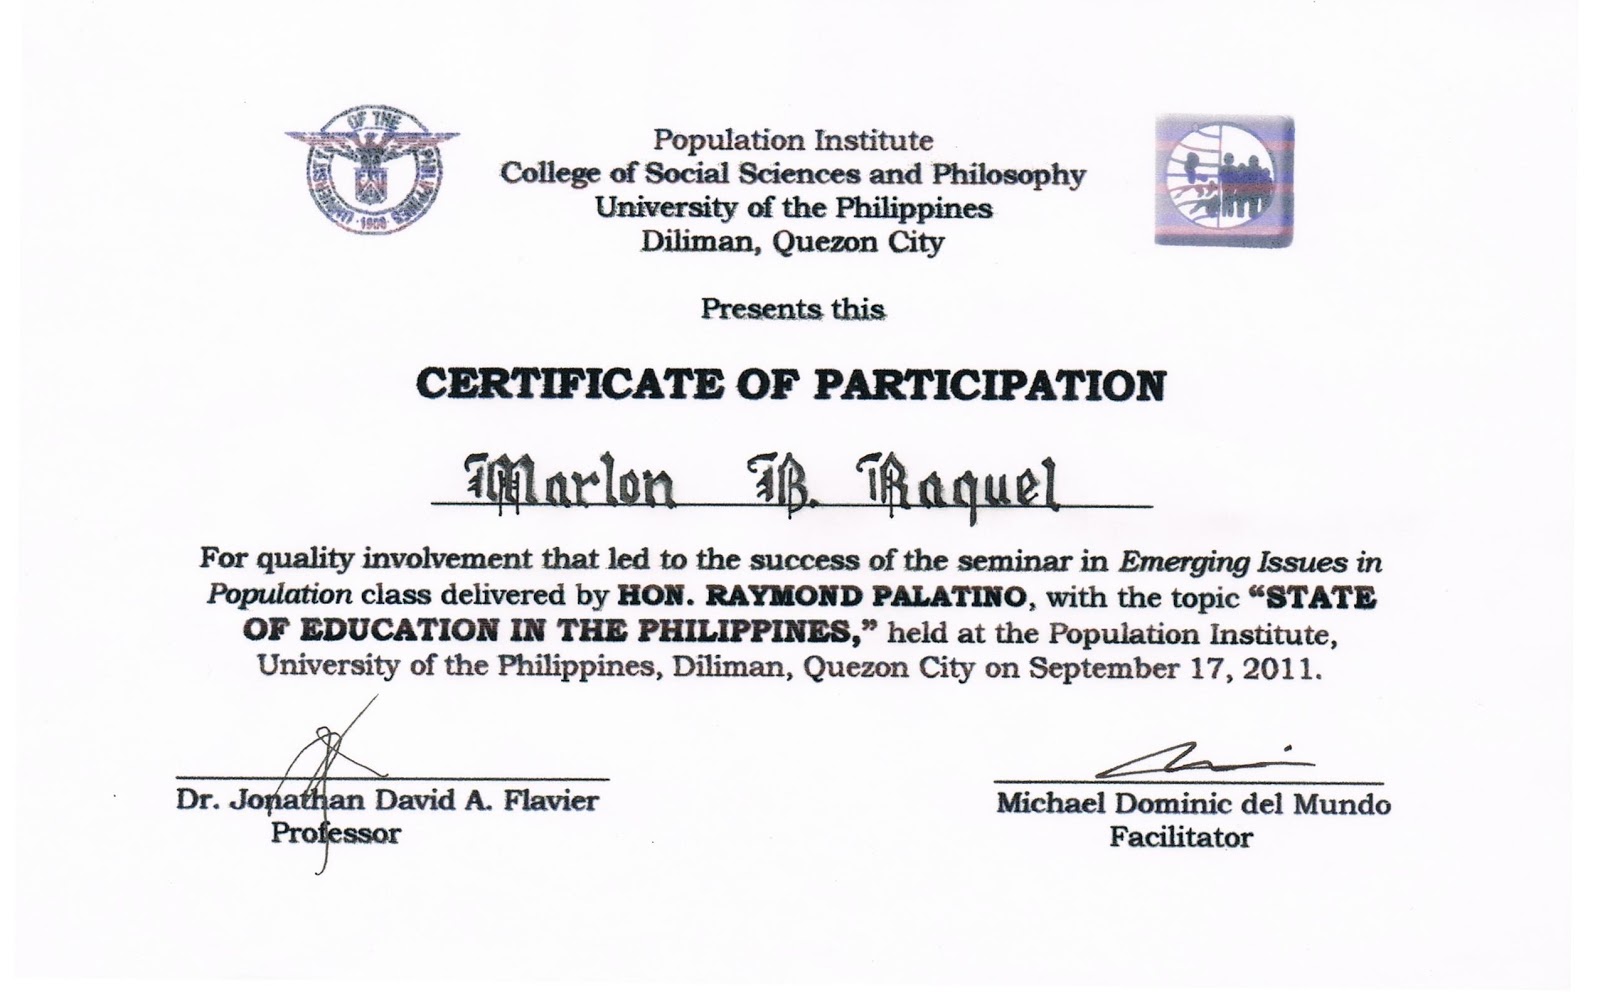 Certificate Of Participation In Workshop Template